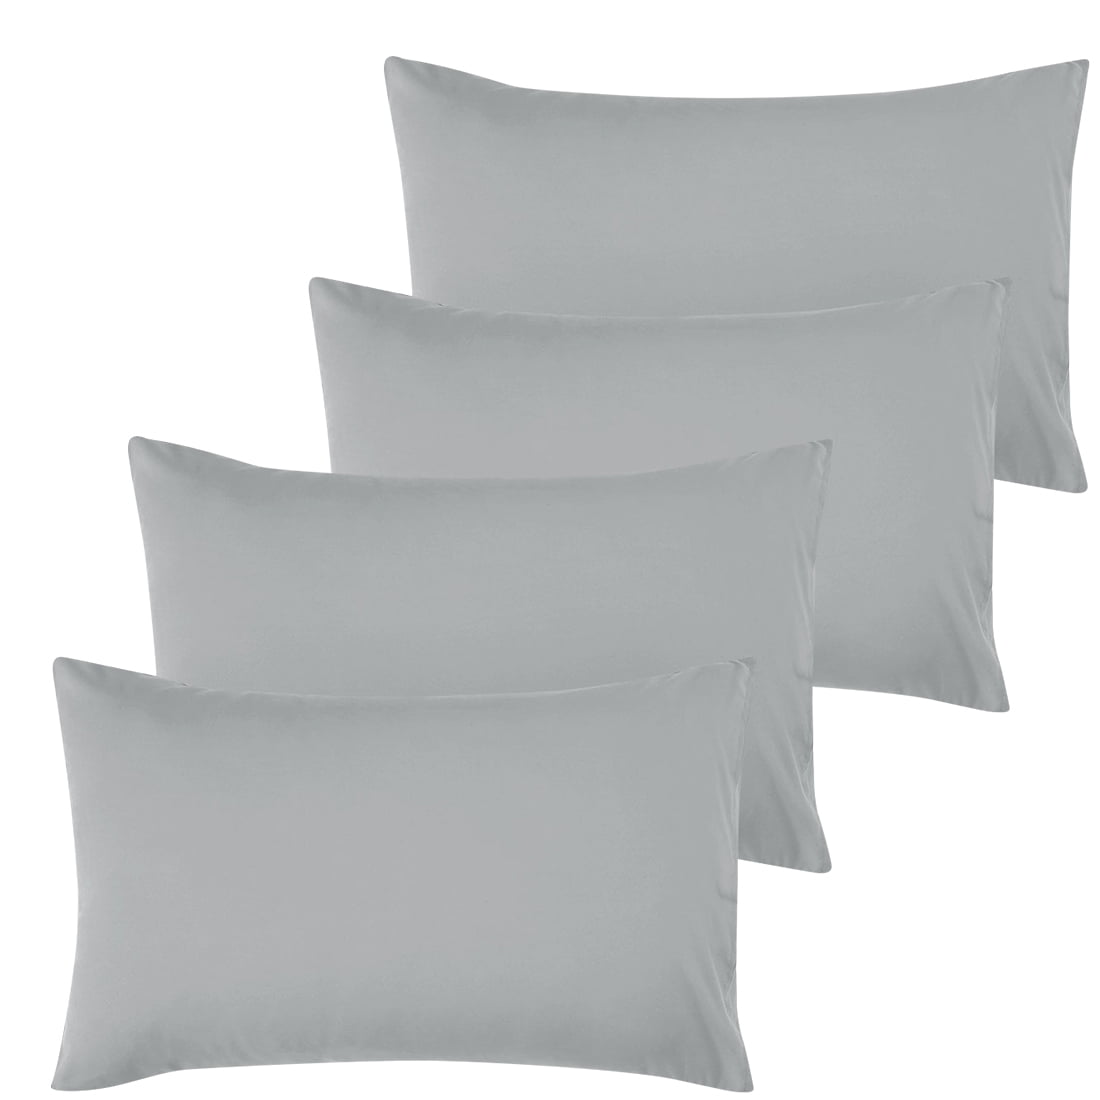 15  new white standard pillow cases covers 20''x30'' arts crafts t180 